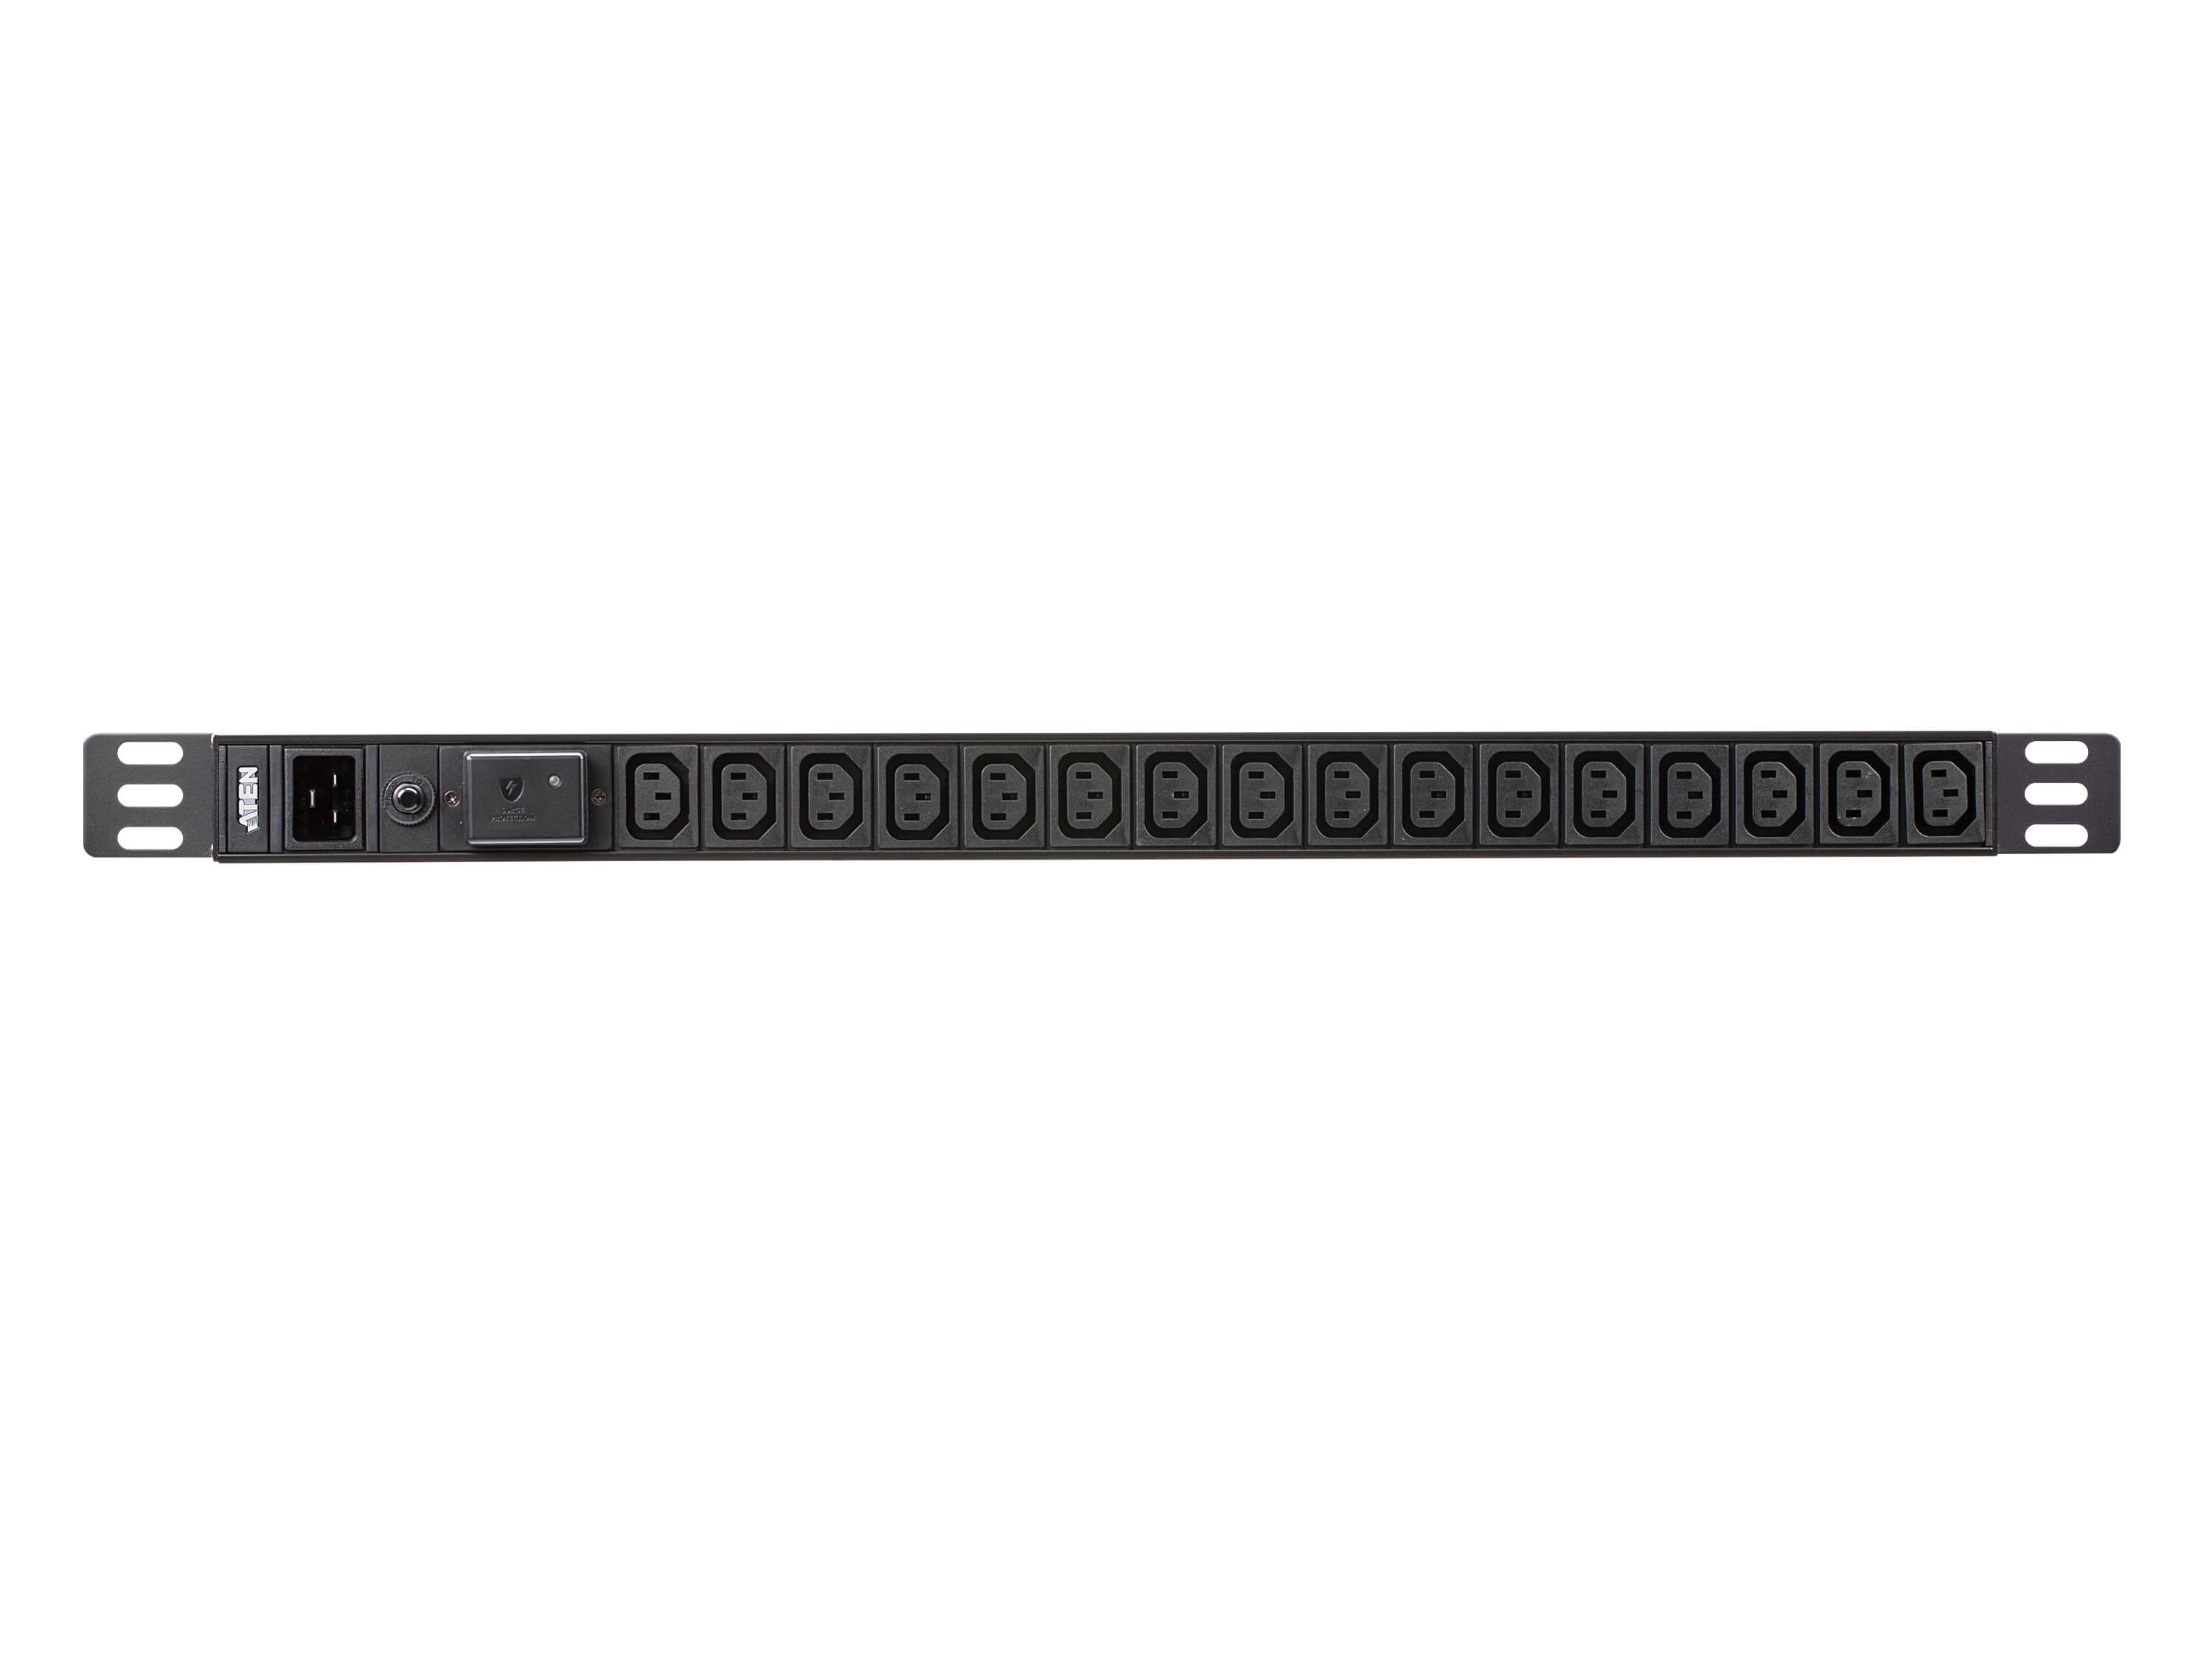 PE0216SB Basic PDU with Surge Protection/100-240 VAC/20A Max by Aten